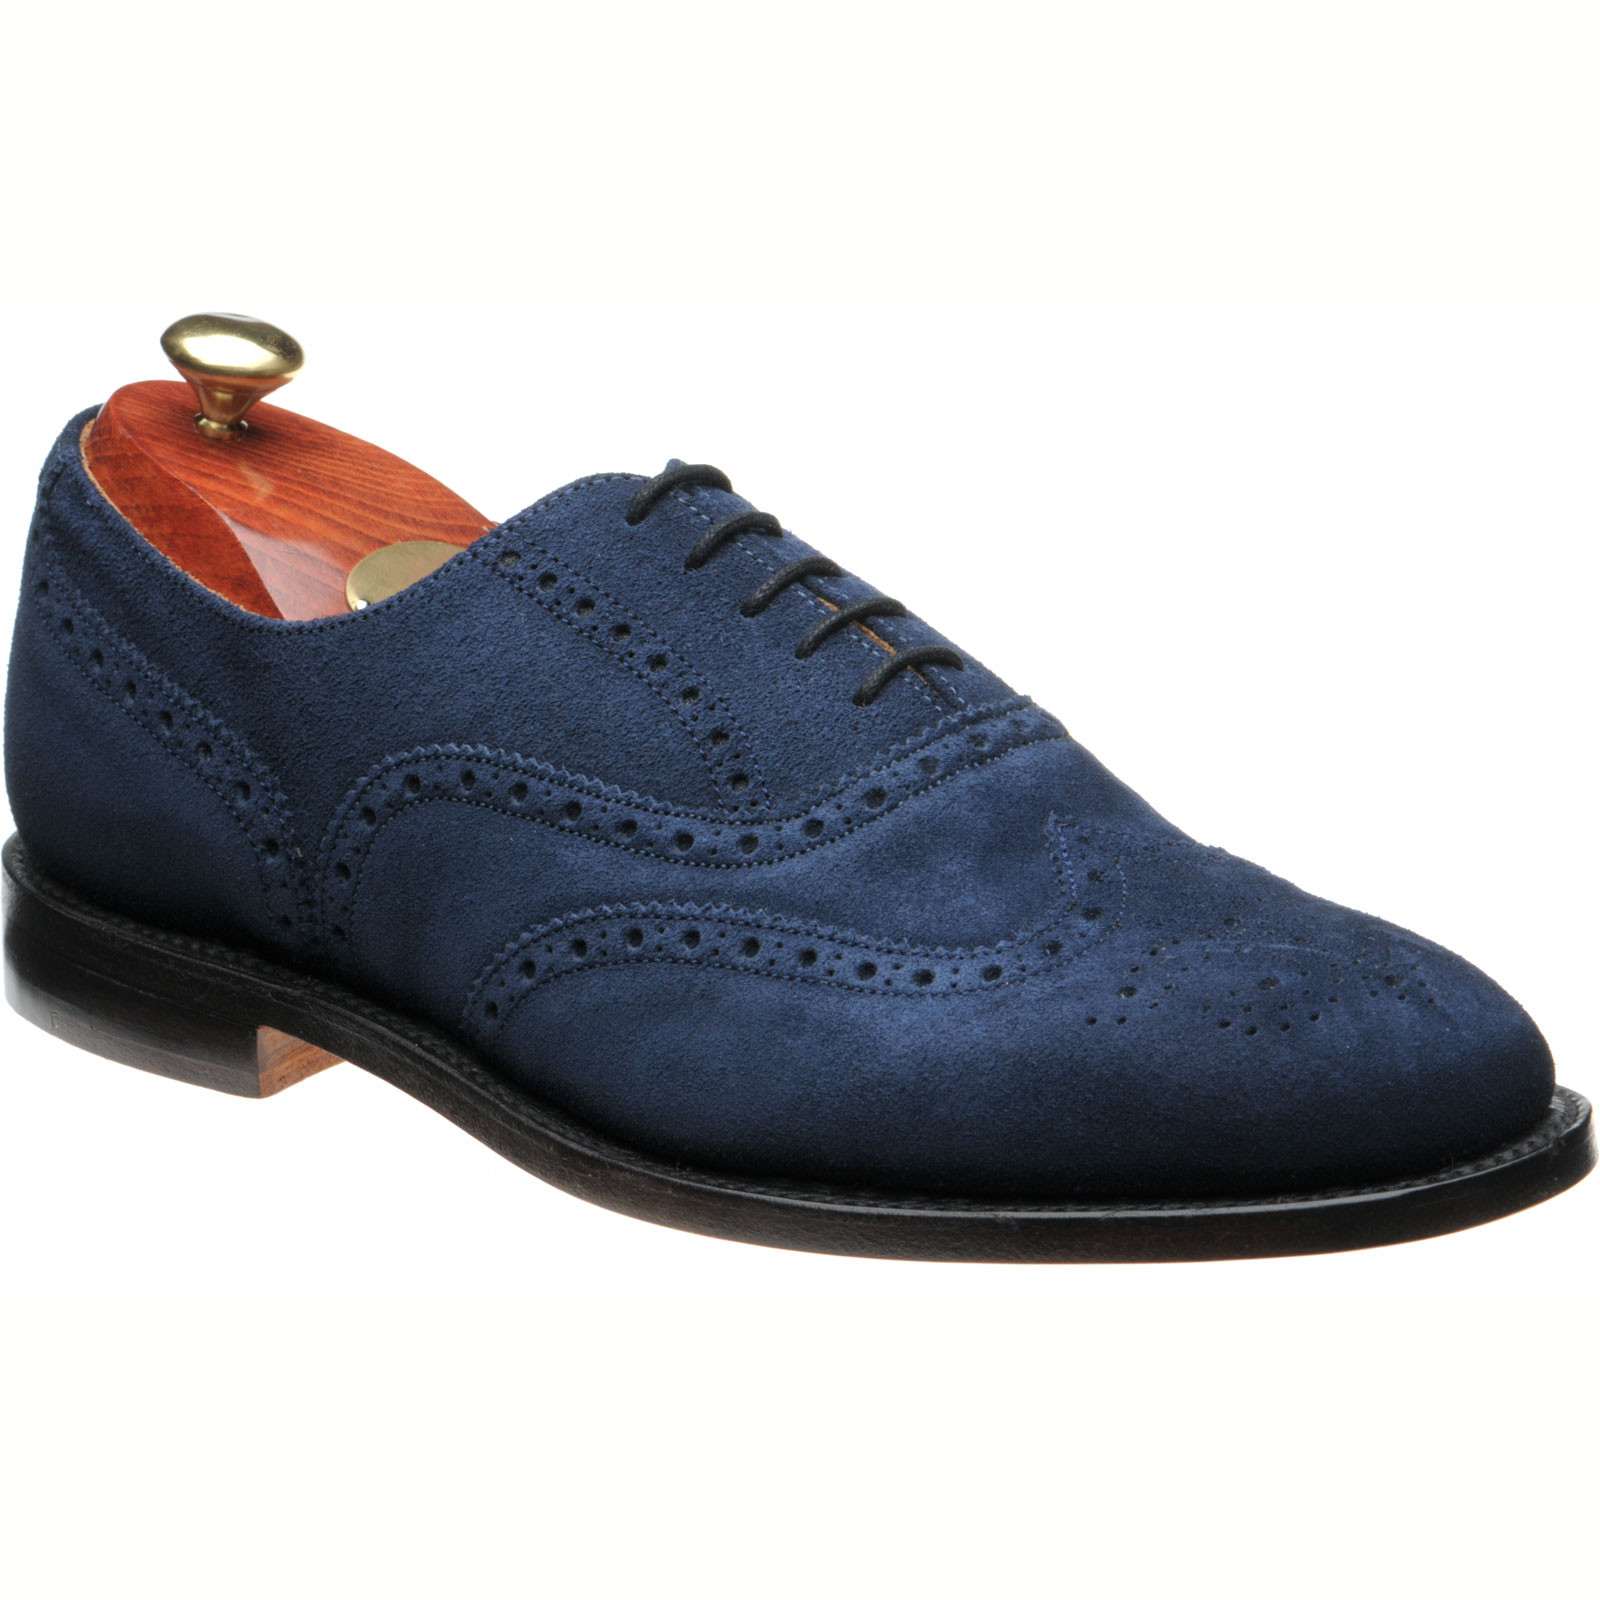 NPS shoes | NPS Sale | Churchill brogues in Navy Suede at Herring Shoes